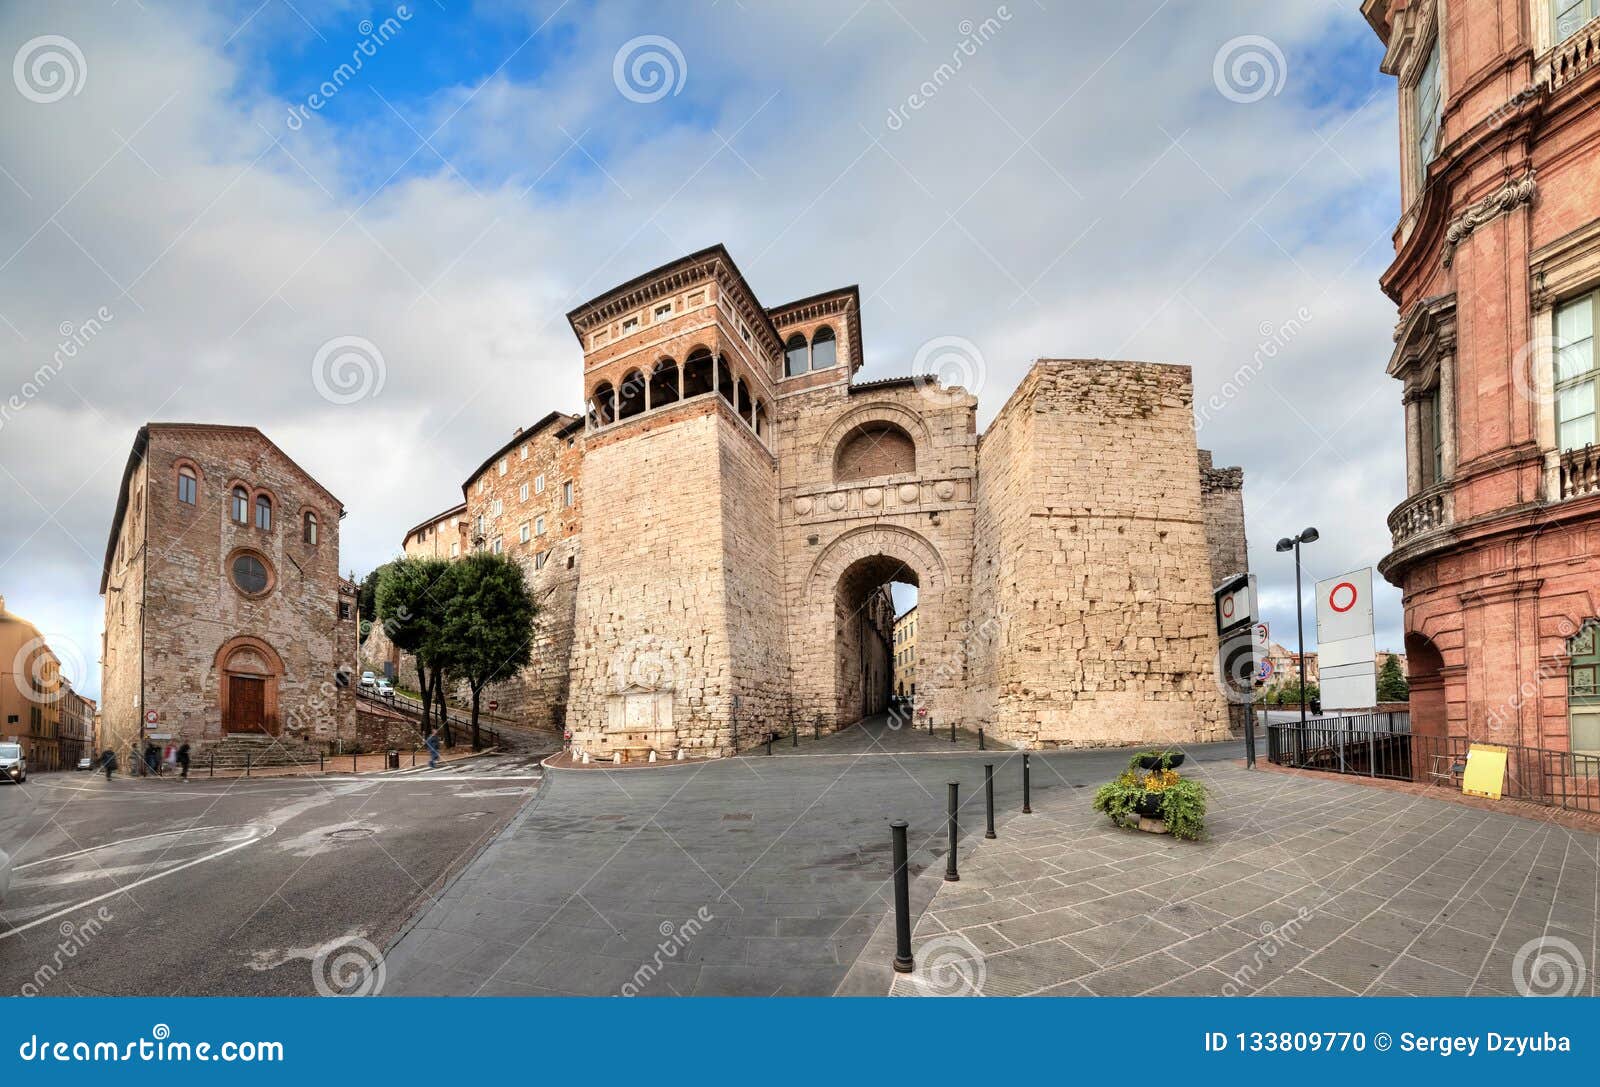 etruscan arch or augustus gate in perugia, italy